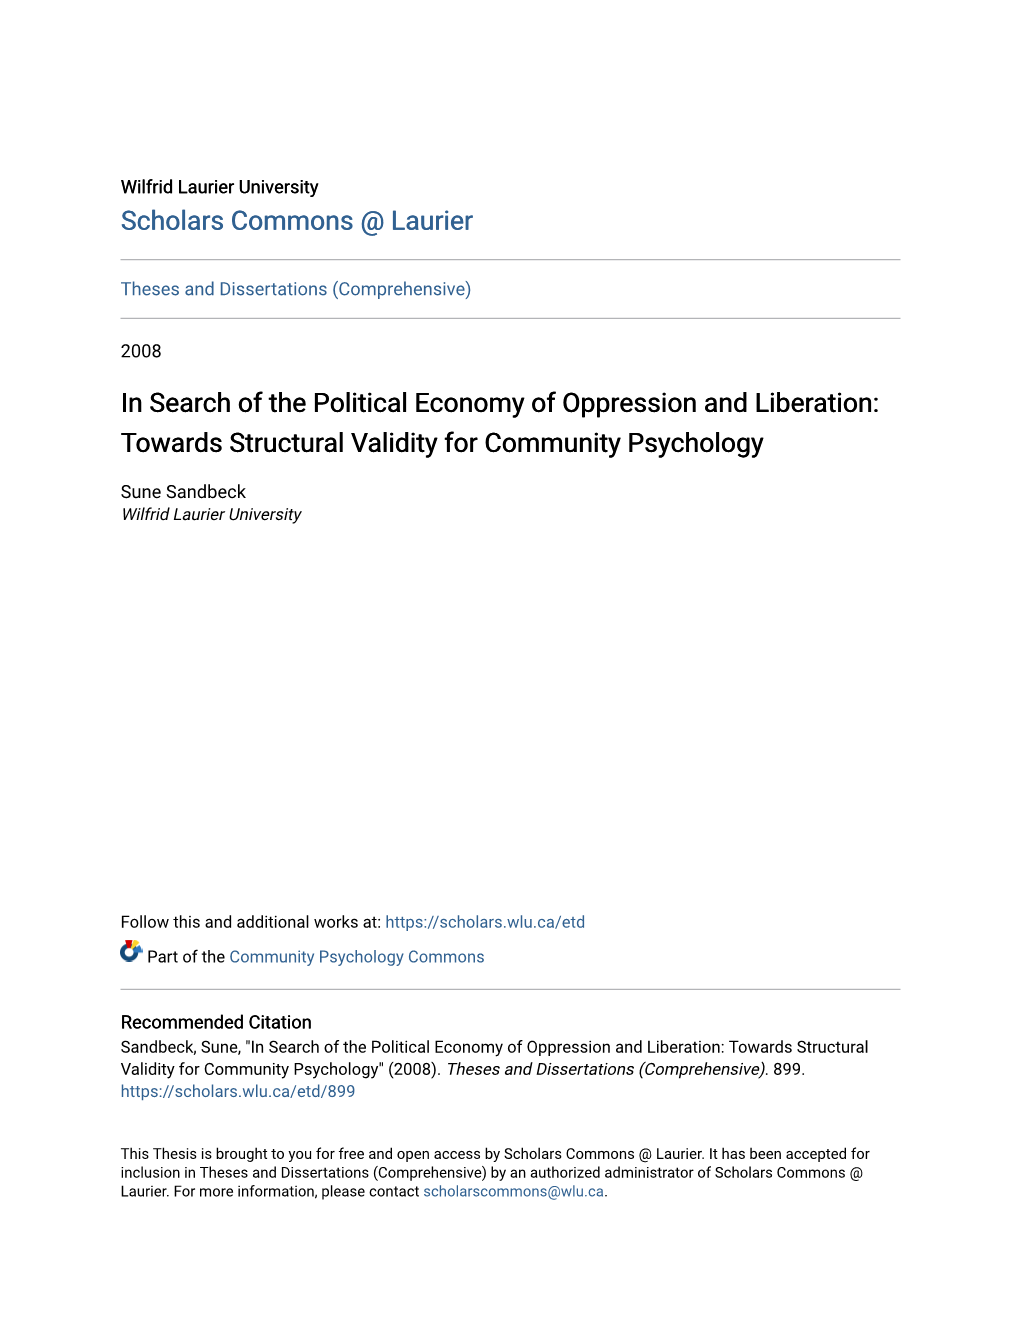 In Search of the Political Economy of Oppression and Liberation: Towards Structural Validity for Community Psychology